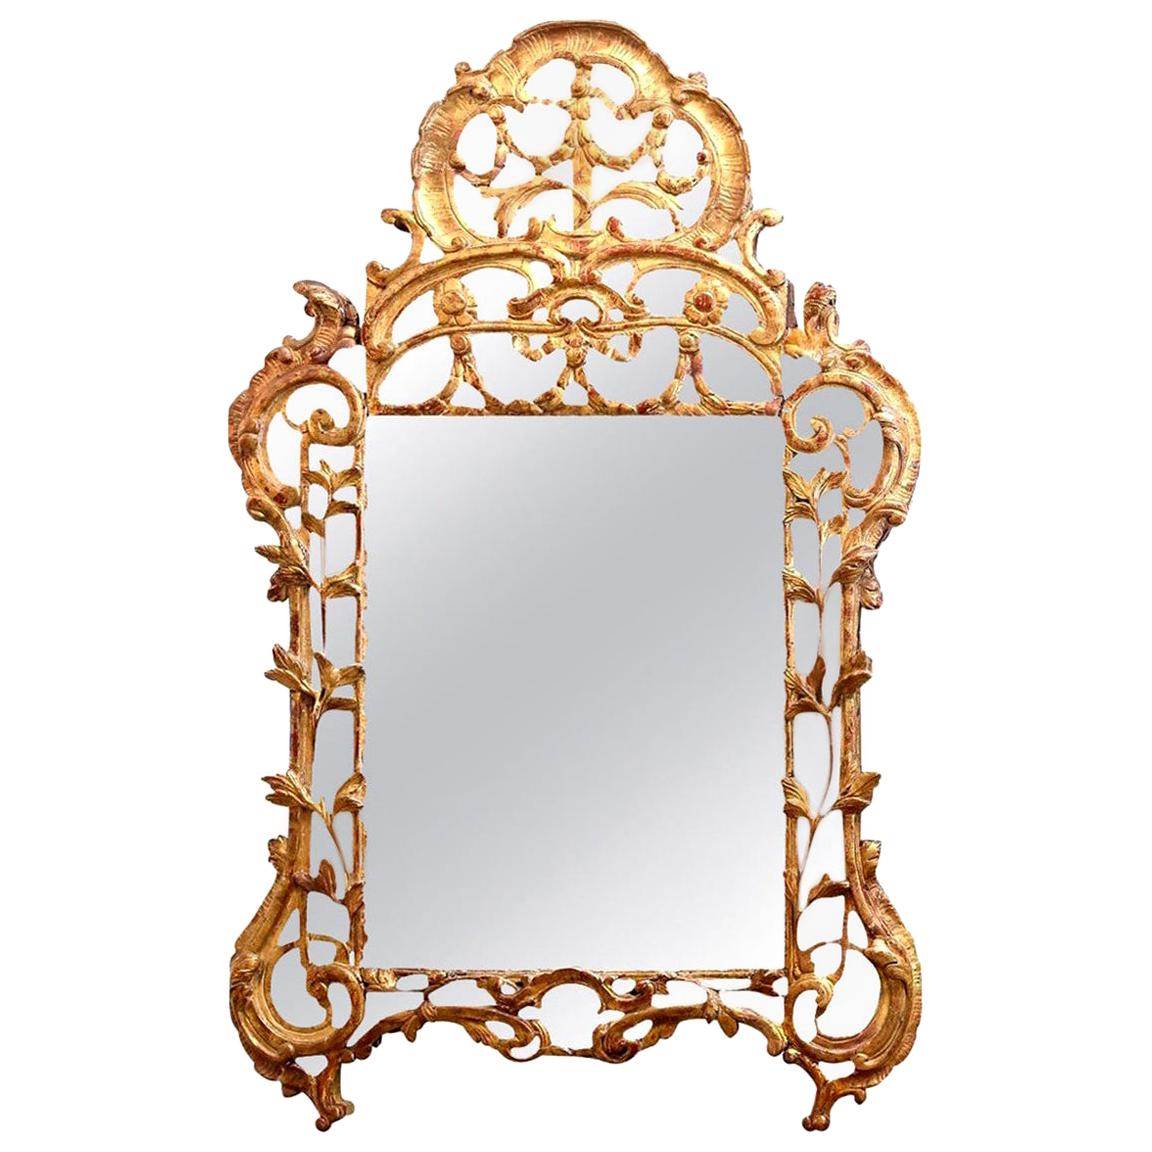 Regence period giltwood mirror, circa 1720-1730. This 18th century French mirror is finely carved with original (or very early) mirror glass. Mercury silvered mirror feature a sparkly, crystalline appearance behind its glass known as 